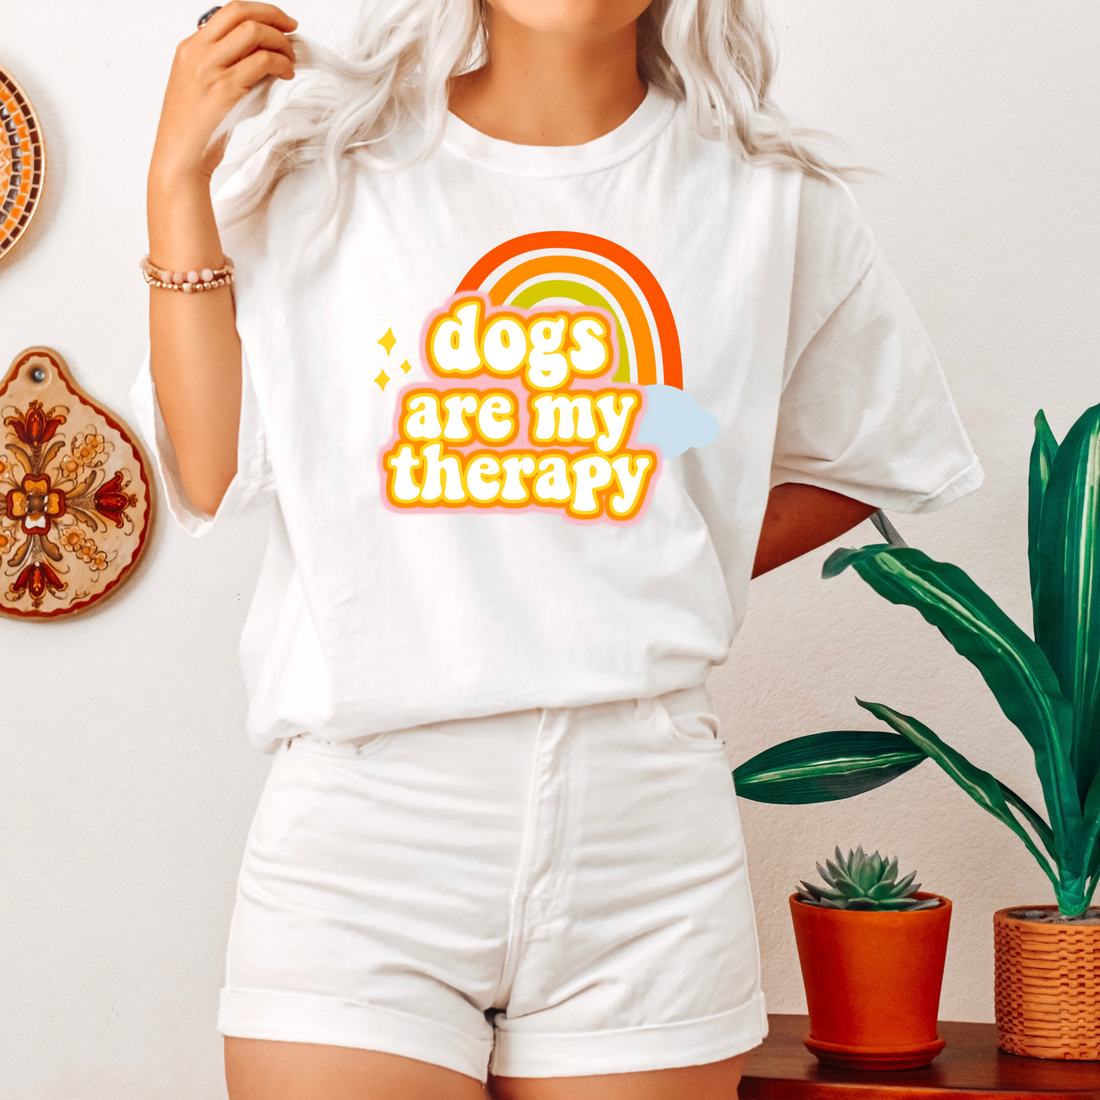 Dogs Are My Therapy - Vintage Tee (White)